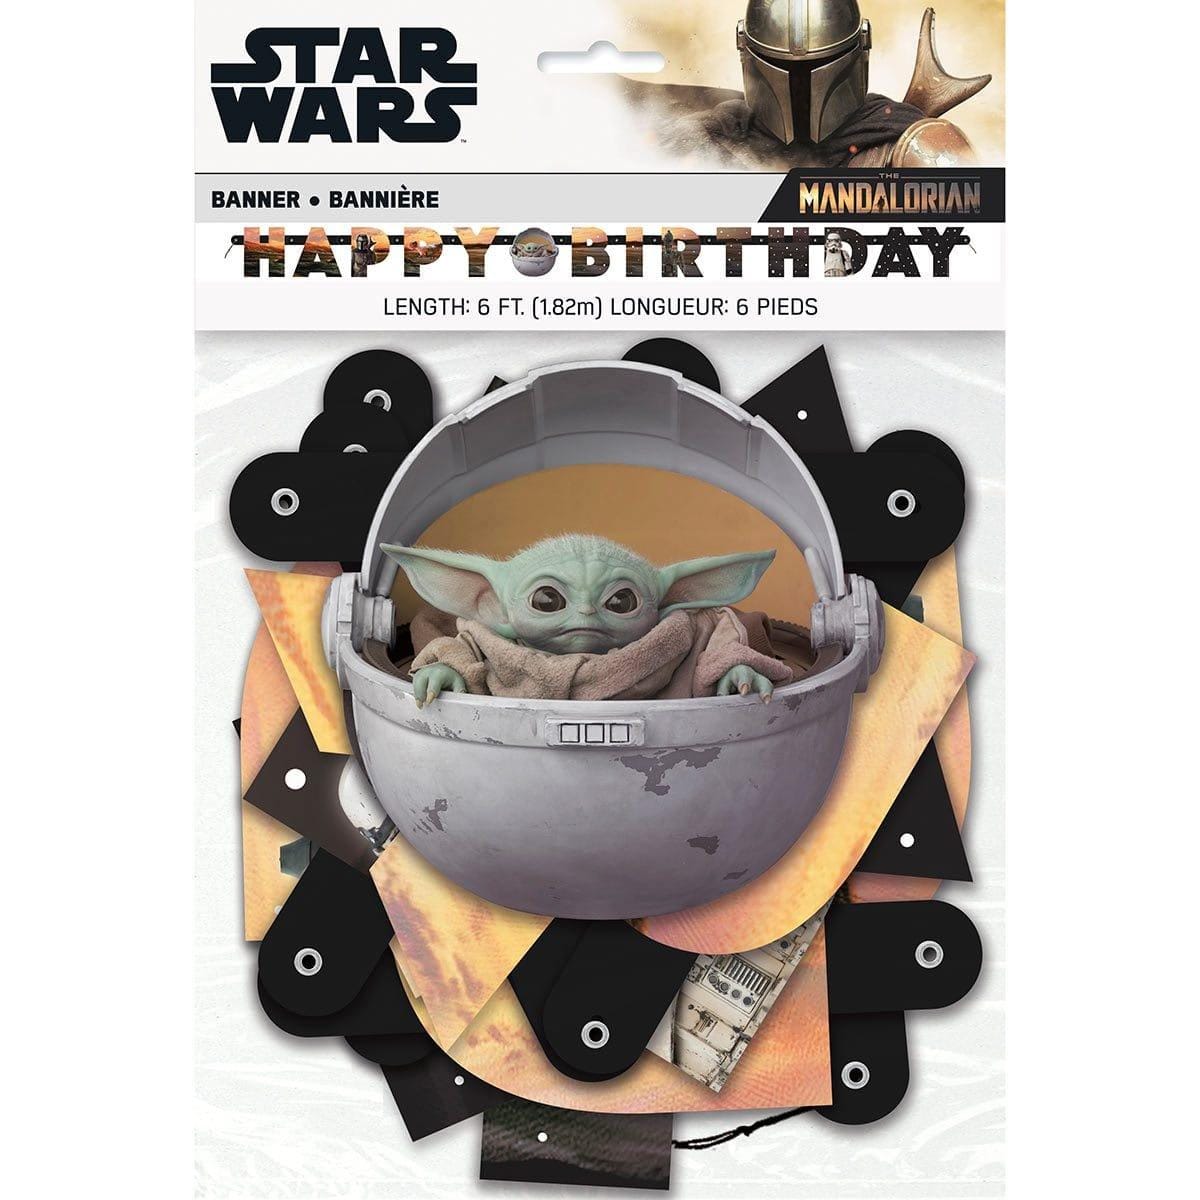 Buy Kids Birthday Baby Yoda large banner sold at Party Expert